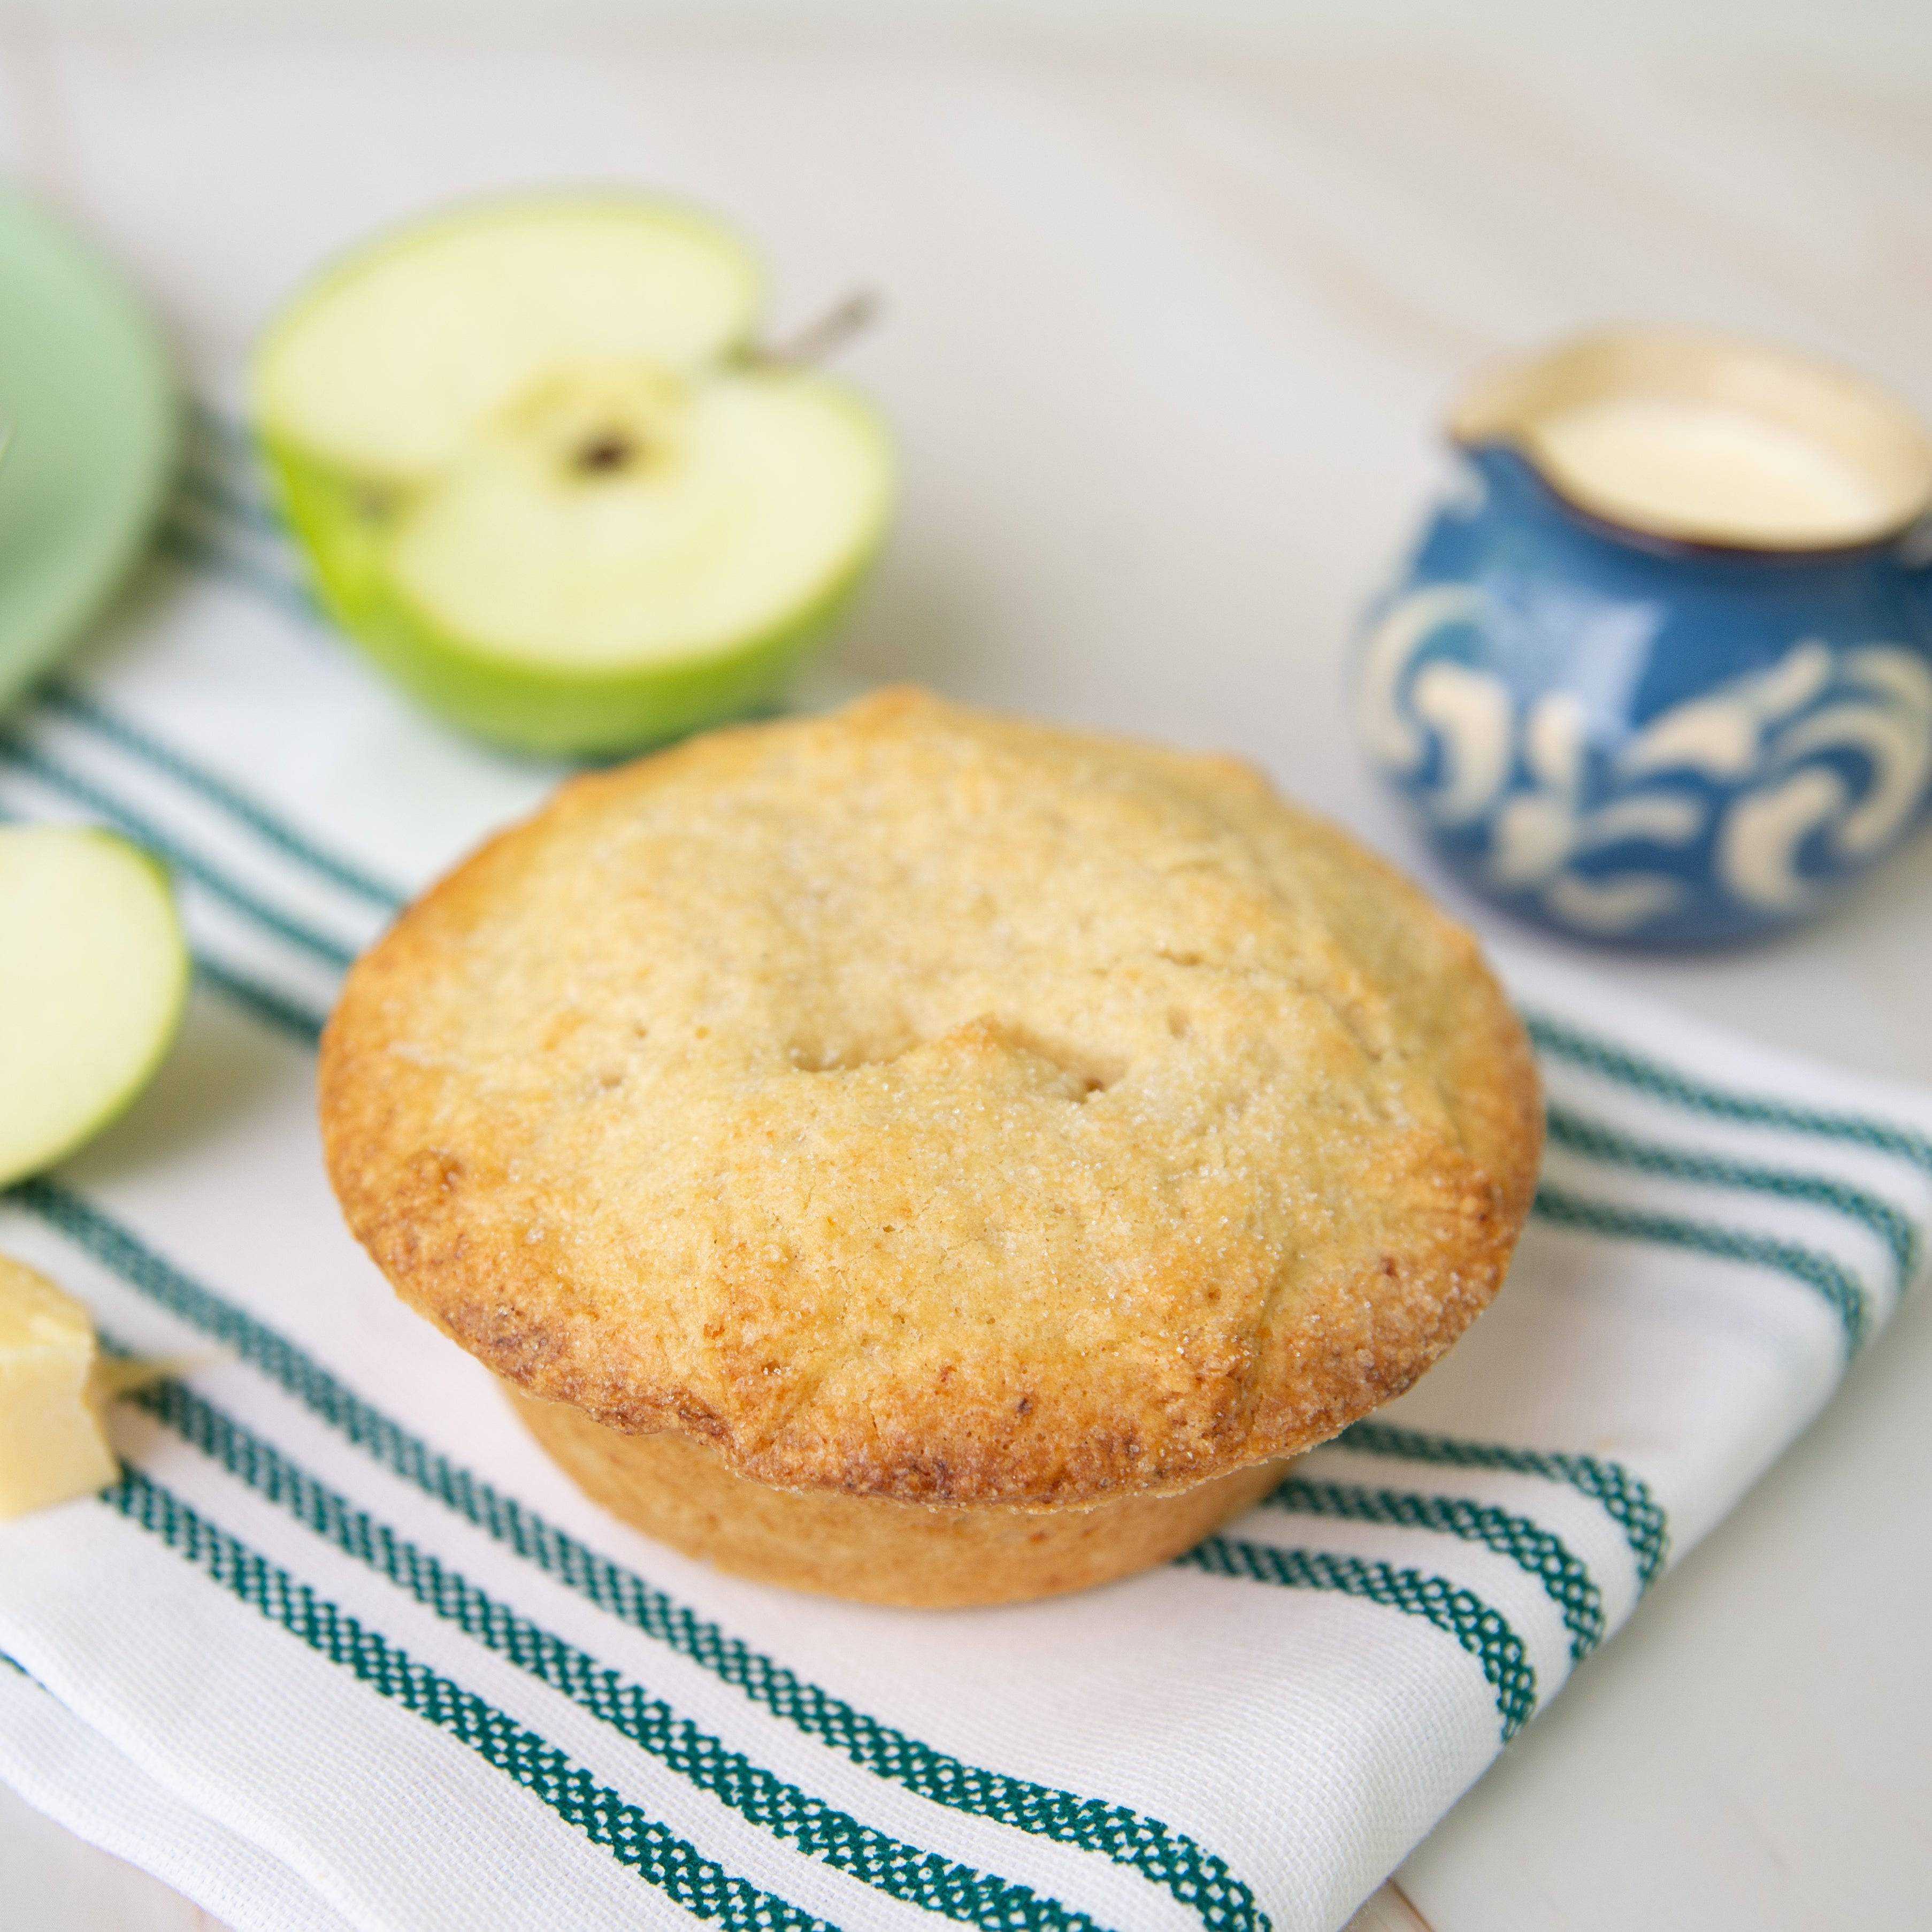 Apple Pie with Cheddar Cheese Crust (Serves 2)